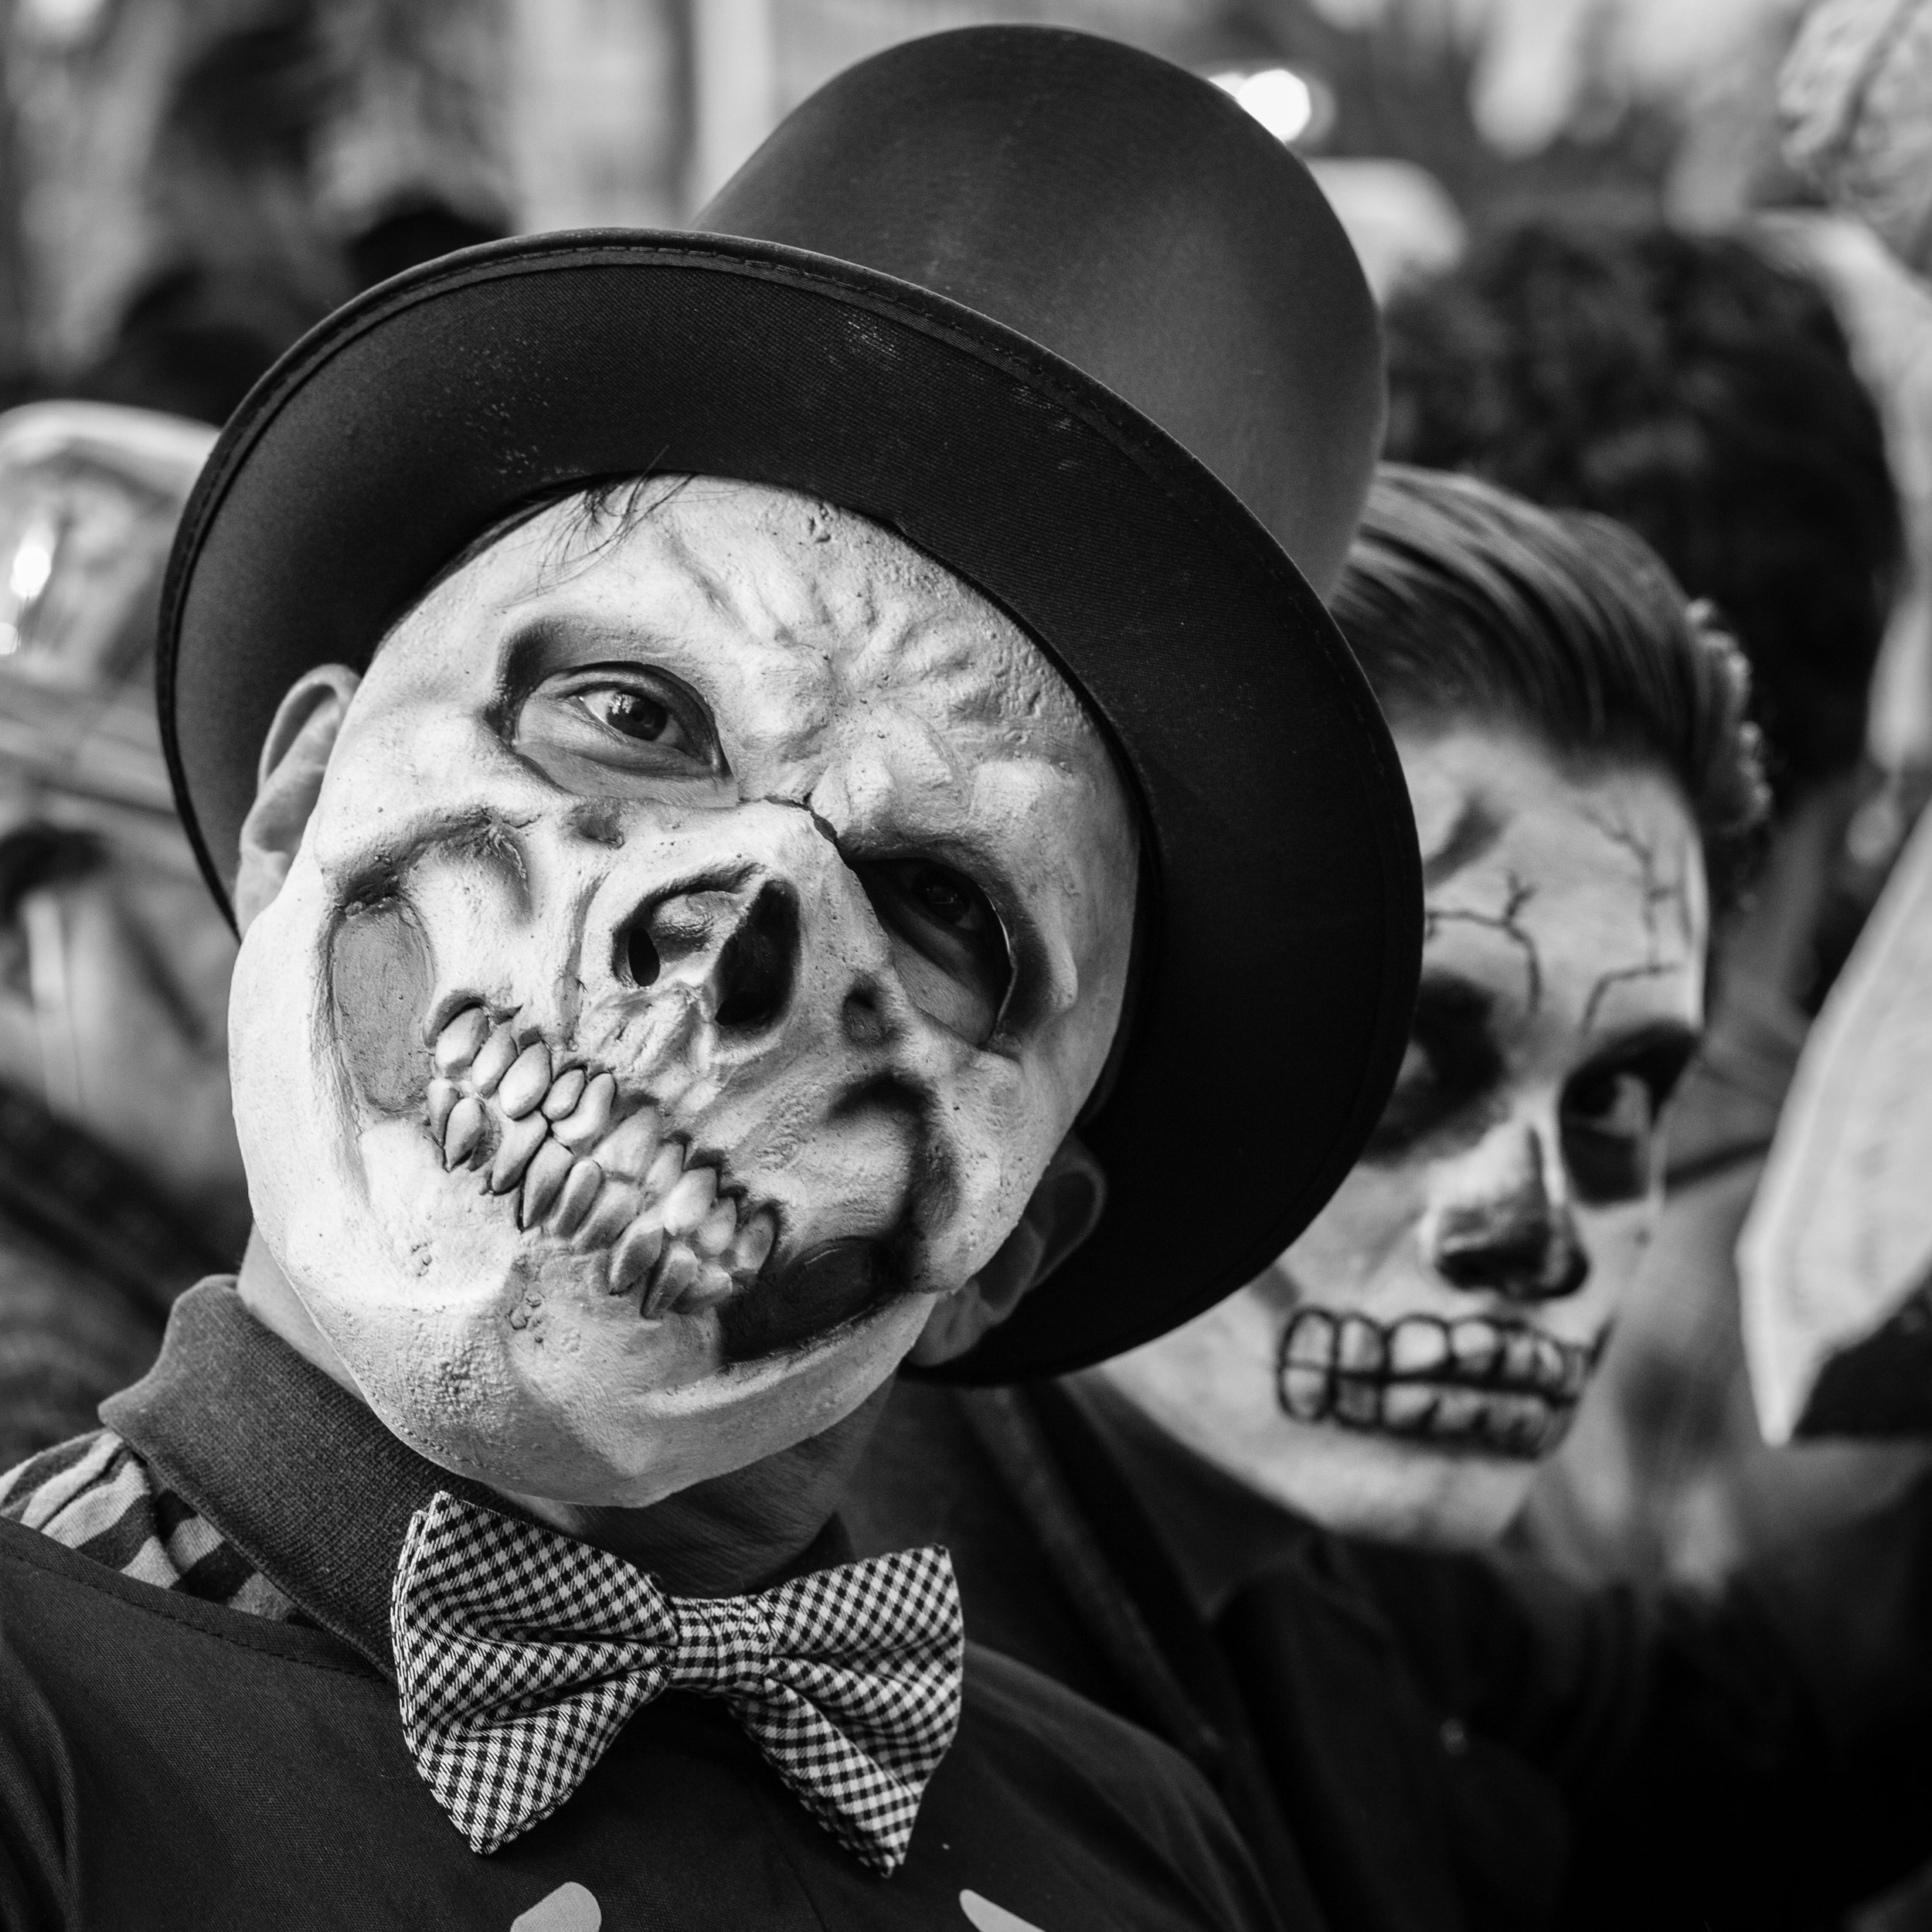 The Day of the Dead Festival in Mexico City.